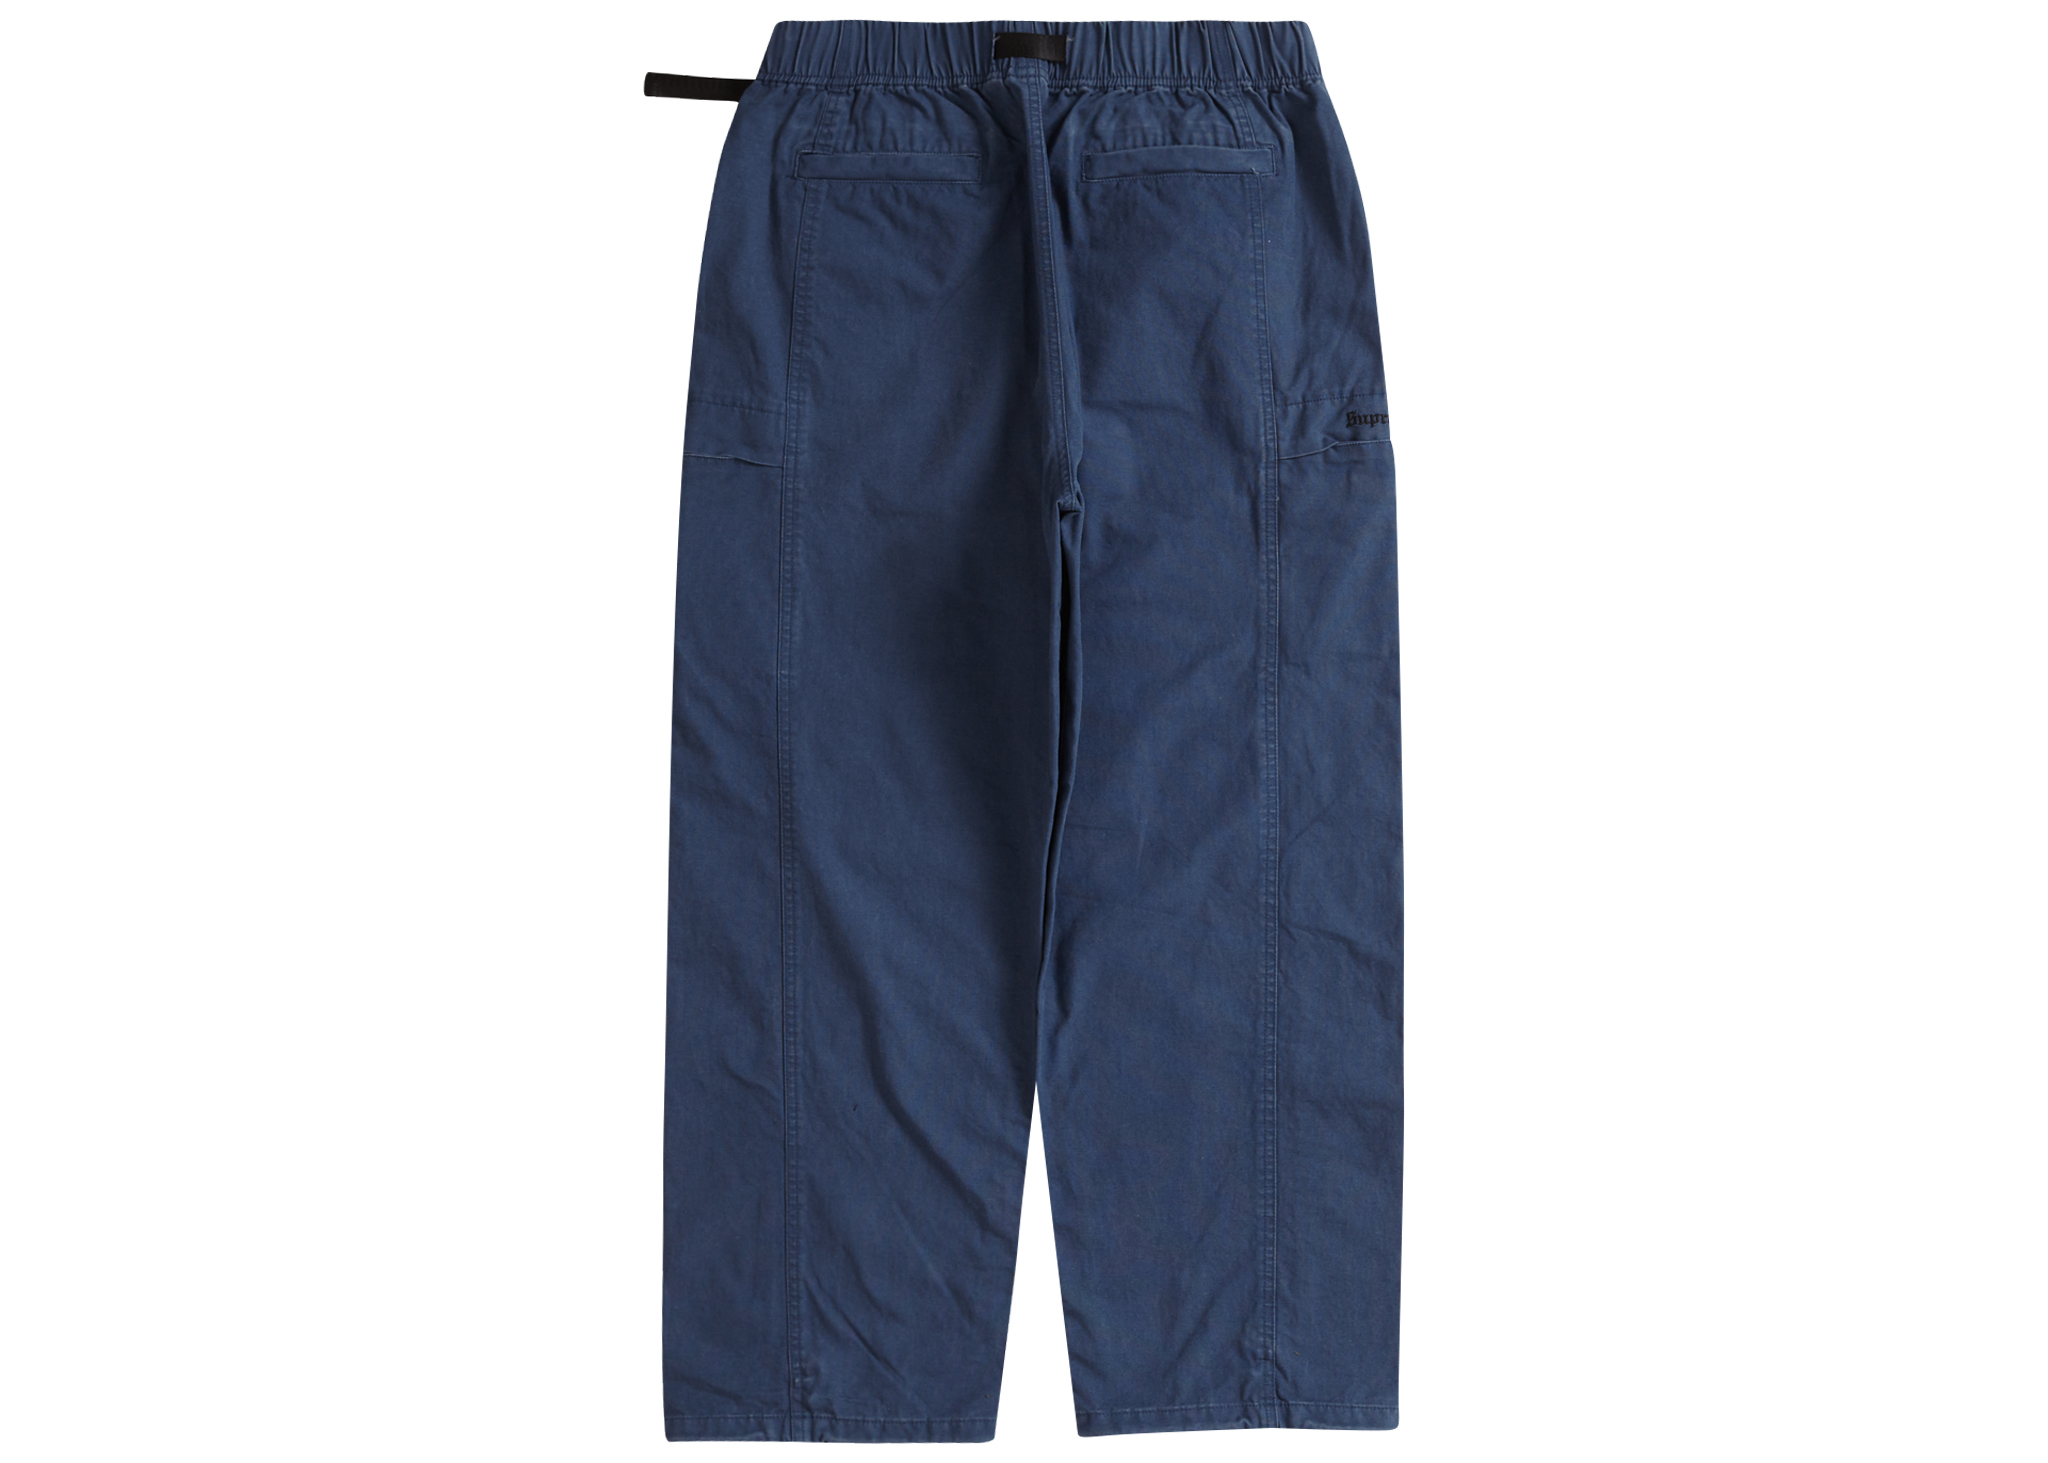 Supreme Belted Trail Pant Small Navy 11000円引き 